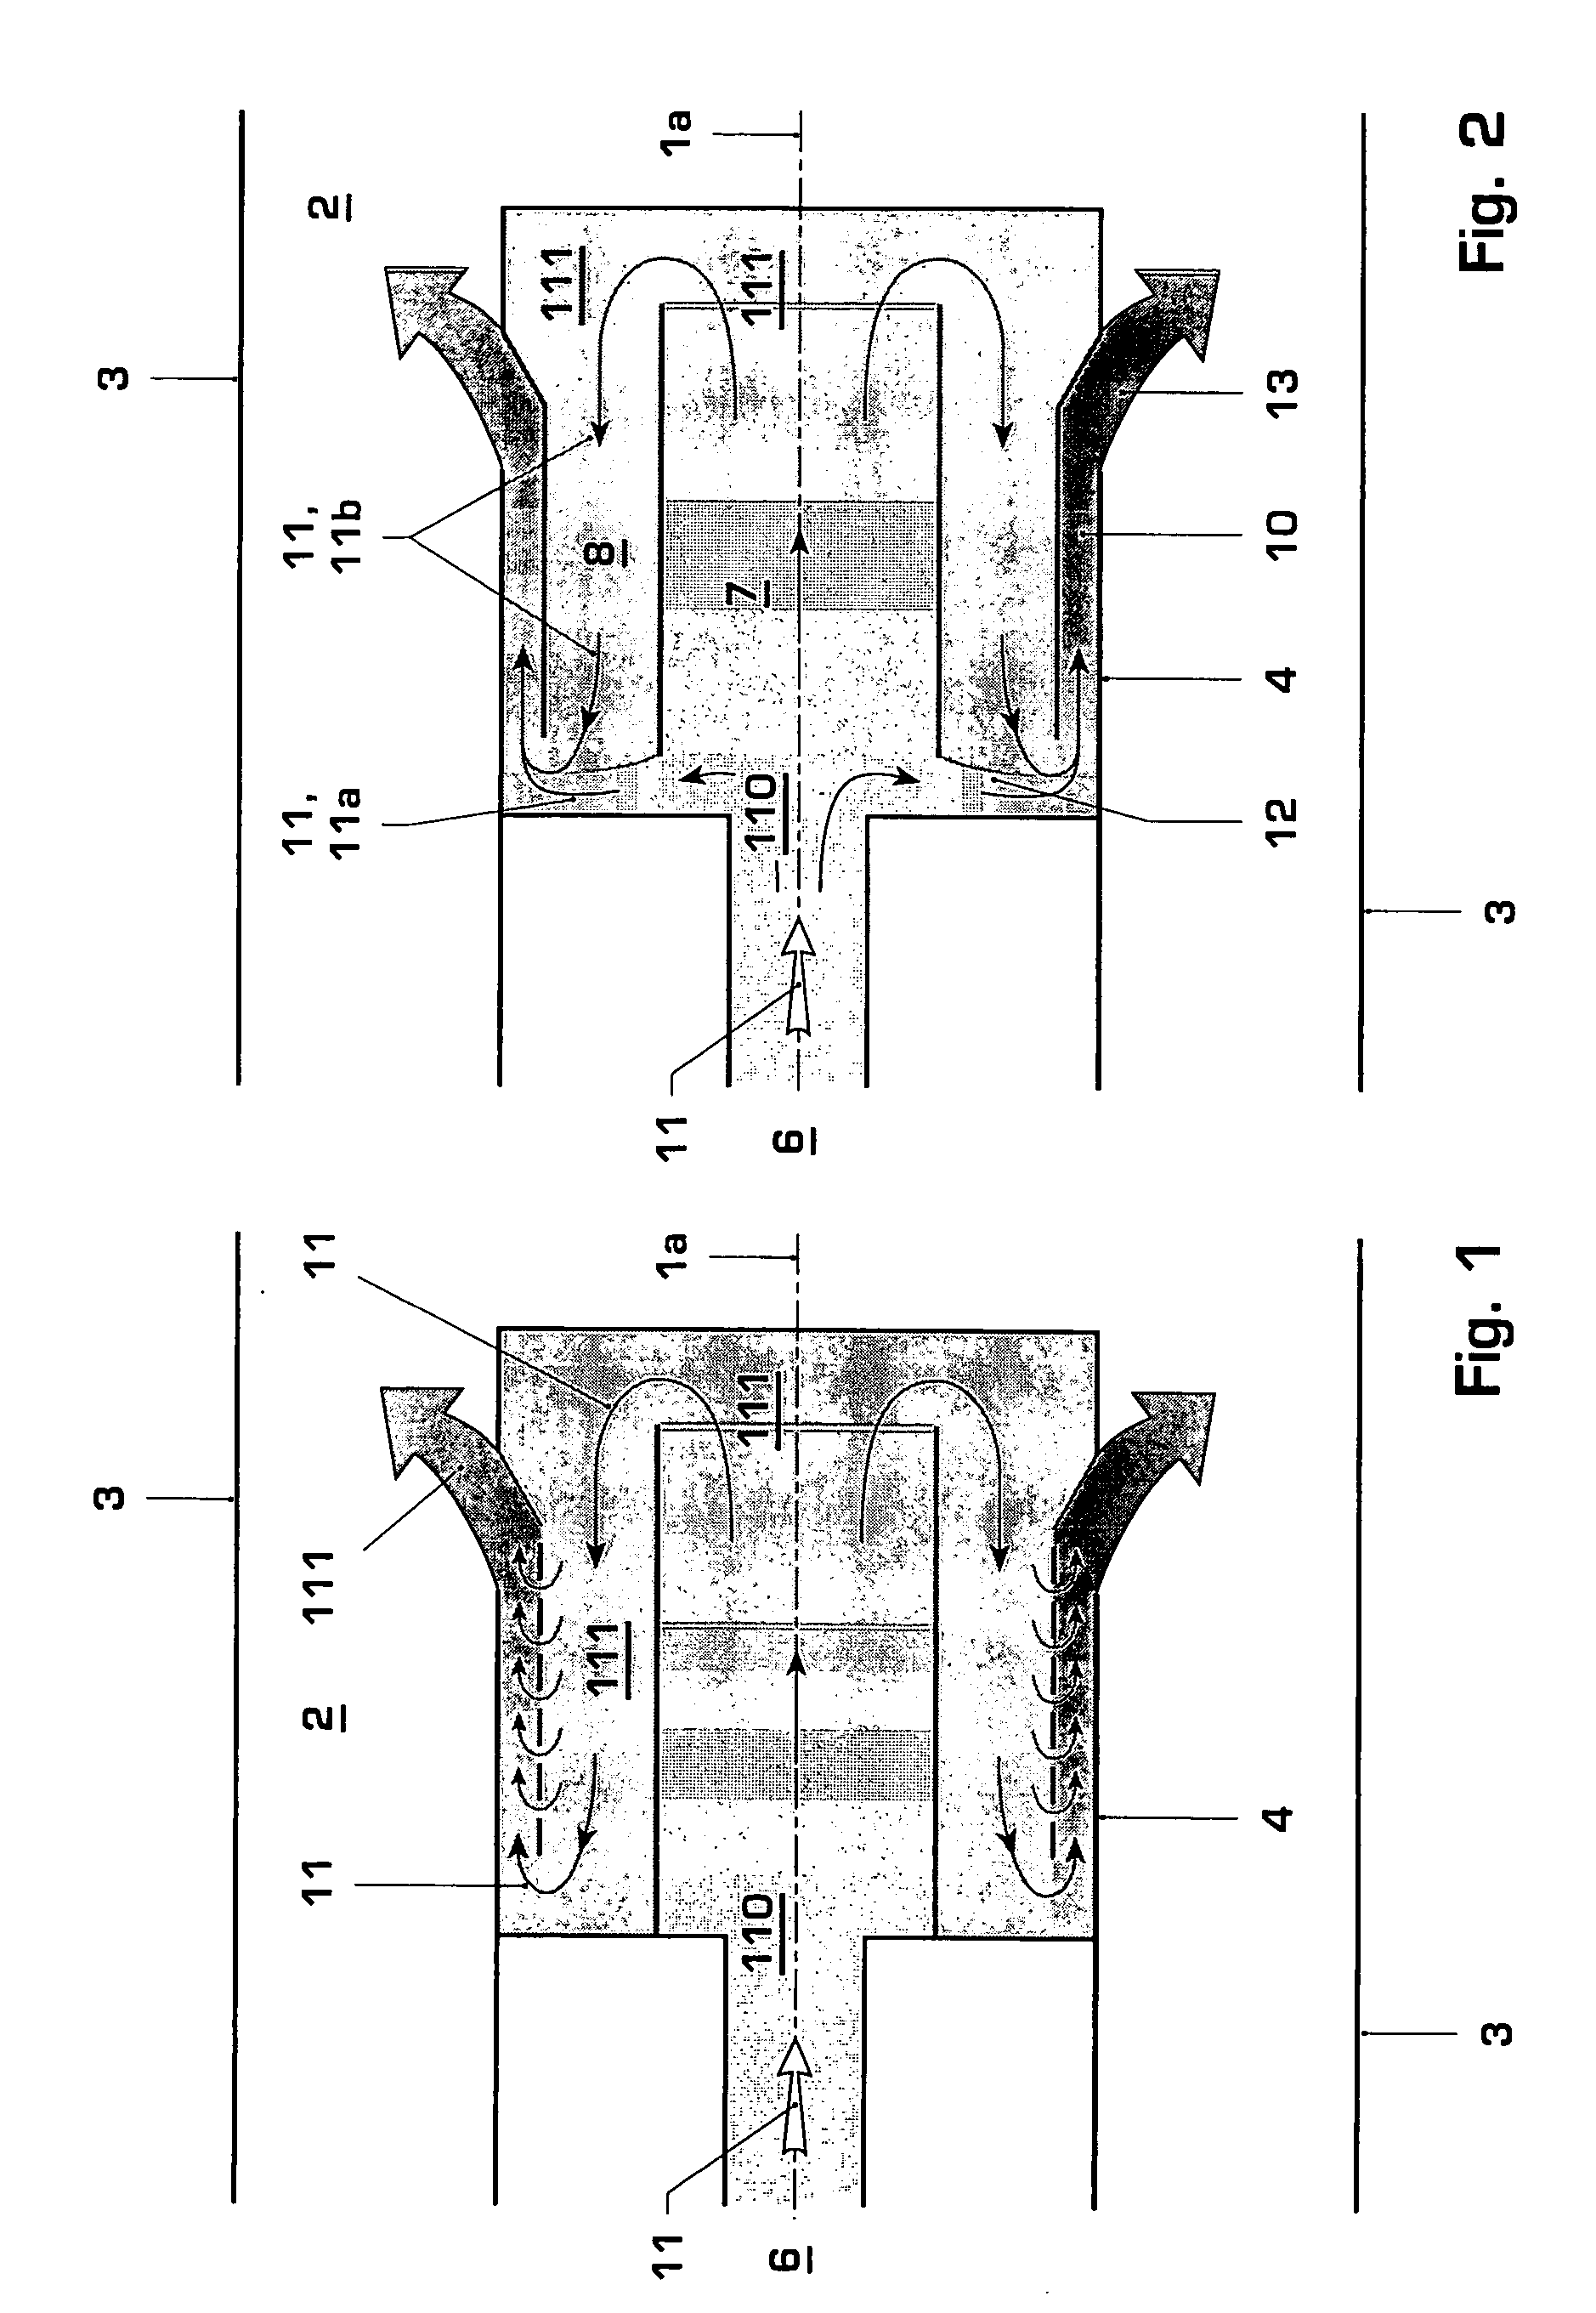 High-voltage circuit breaker with improved circuit breaker rating